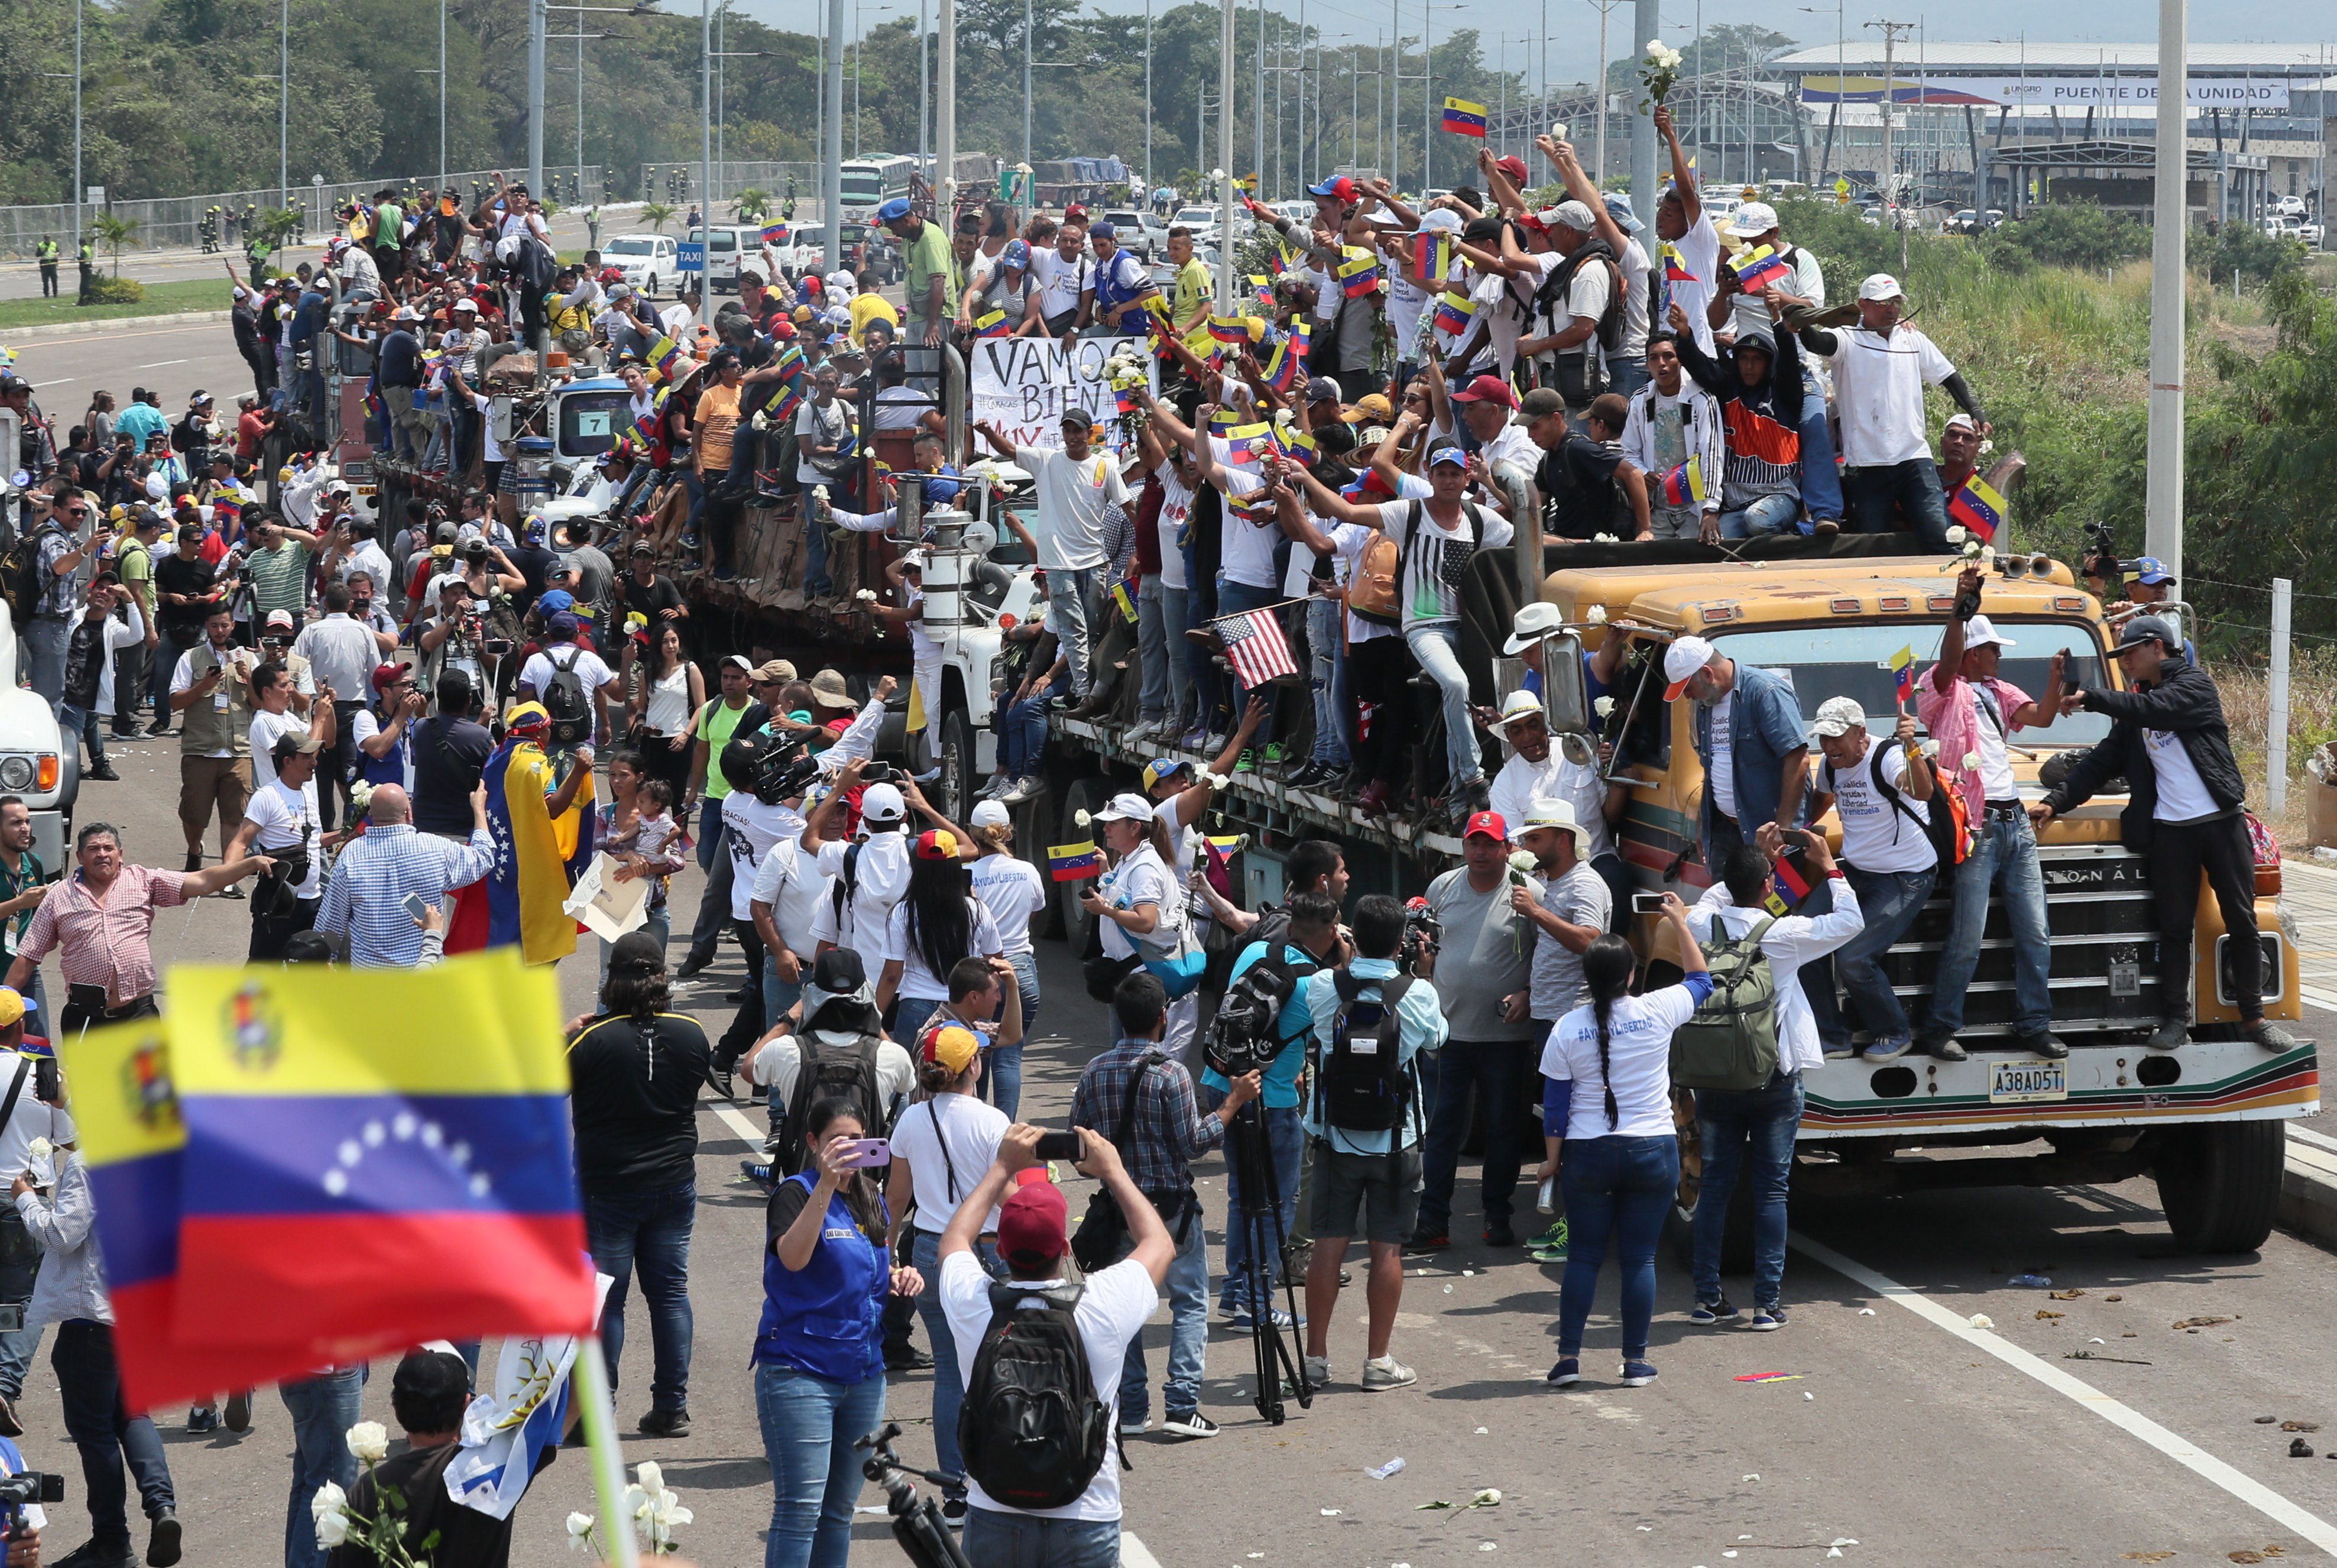 epa07391046 View of Venezuelan citizens riding in trucks, in Cucuta, Colombia, 23 February 2019. Hundreds of Venezuelans gathered today on the Colombian side of the Simon Bolivar international bridge that connects Cucuta with San Antonio, in the Venezuelan state of Tachira, to form a corridor to allow humanitarian aid to go to their country.  EPA/Mauricio Dueñas Castañeda